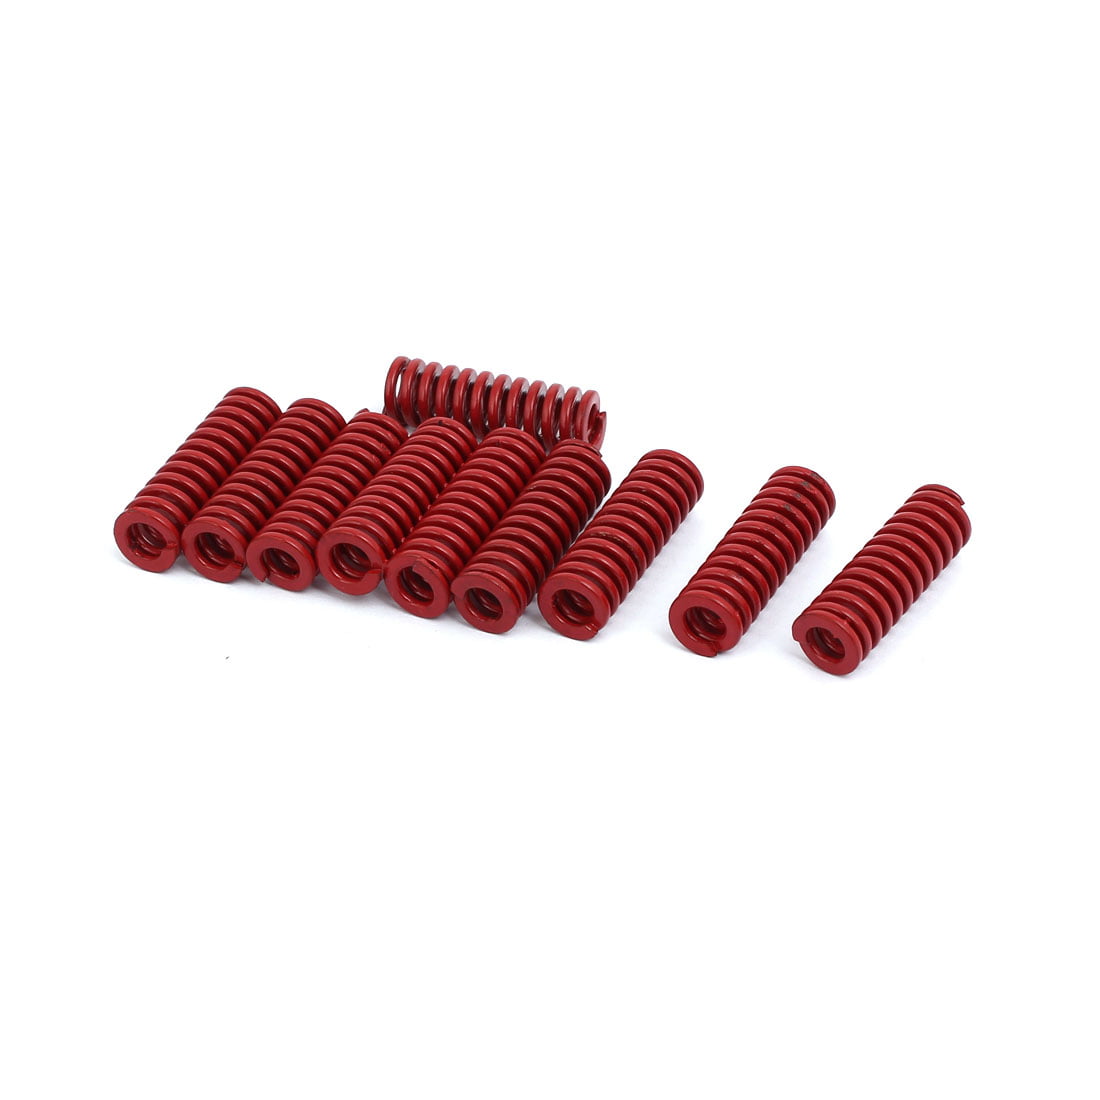 10mm Outer Dia 30mm Length Medium Load Compression Mould Die Spring Red 5pcs 